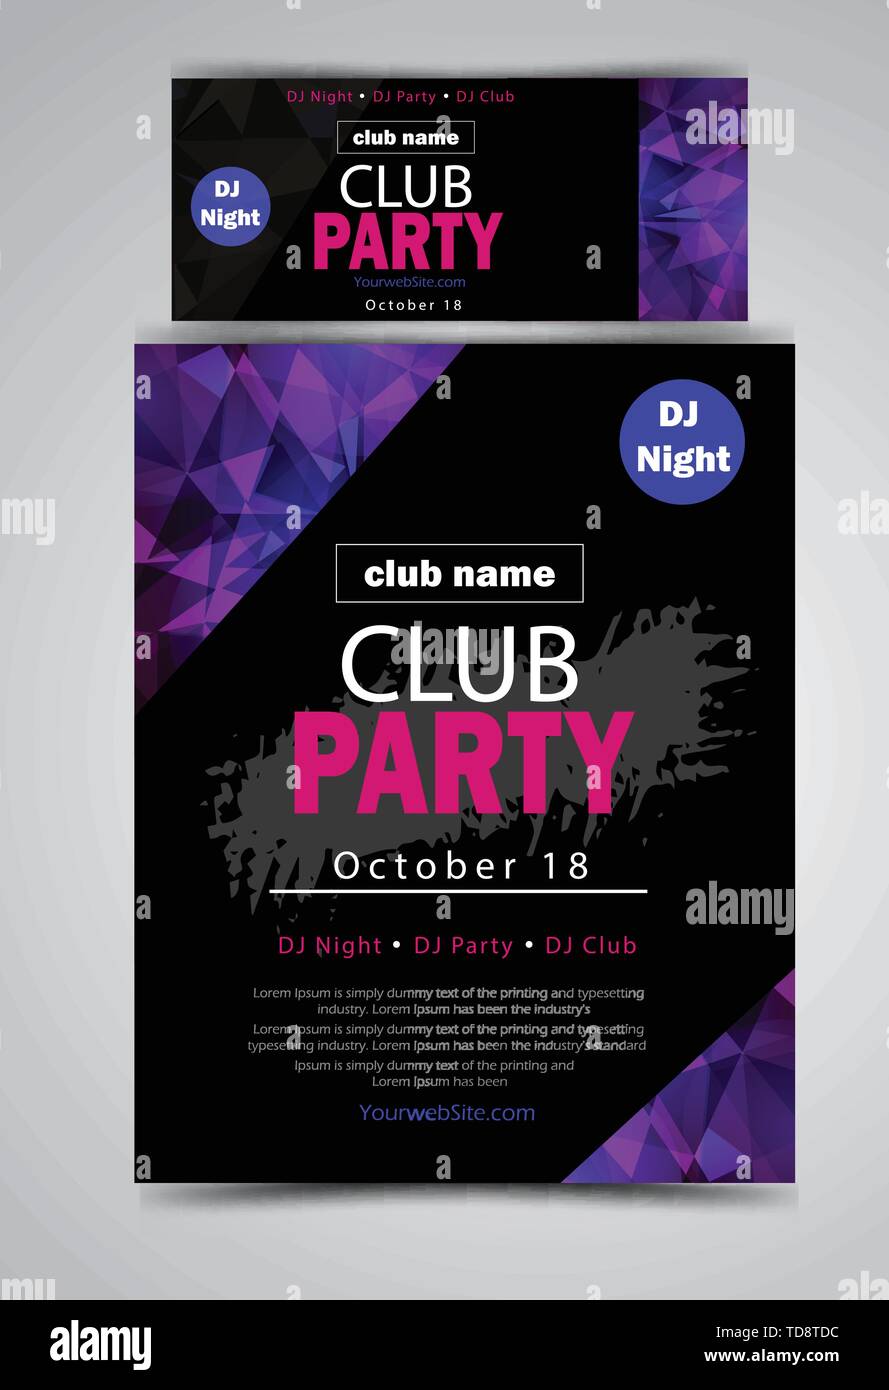 Party Flyer Poster Futuristic Club Flyer Design Template Stock Vector Image Art Alamy